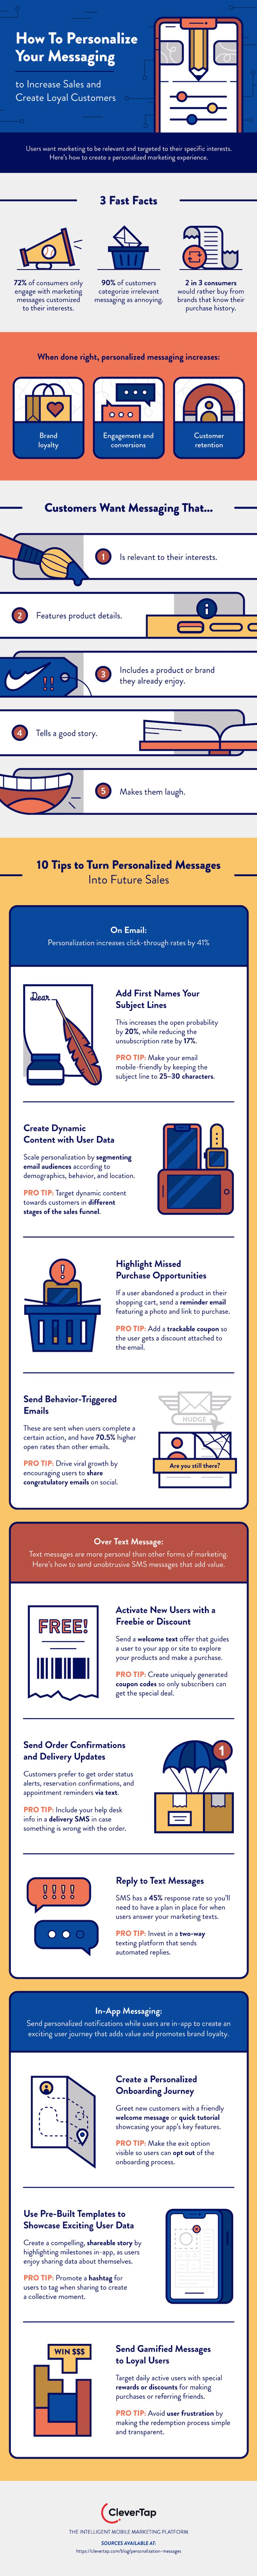 10 ways to personalize your brand messaging infographic